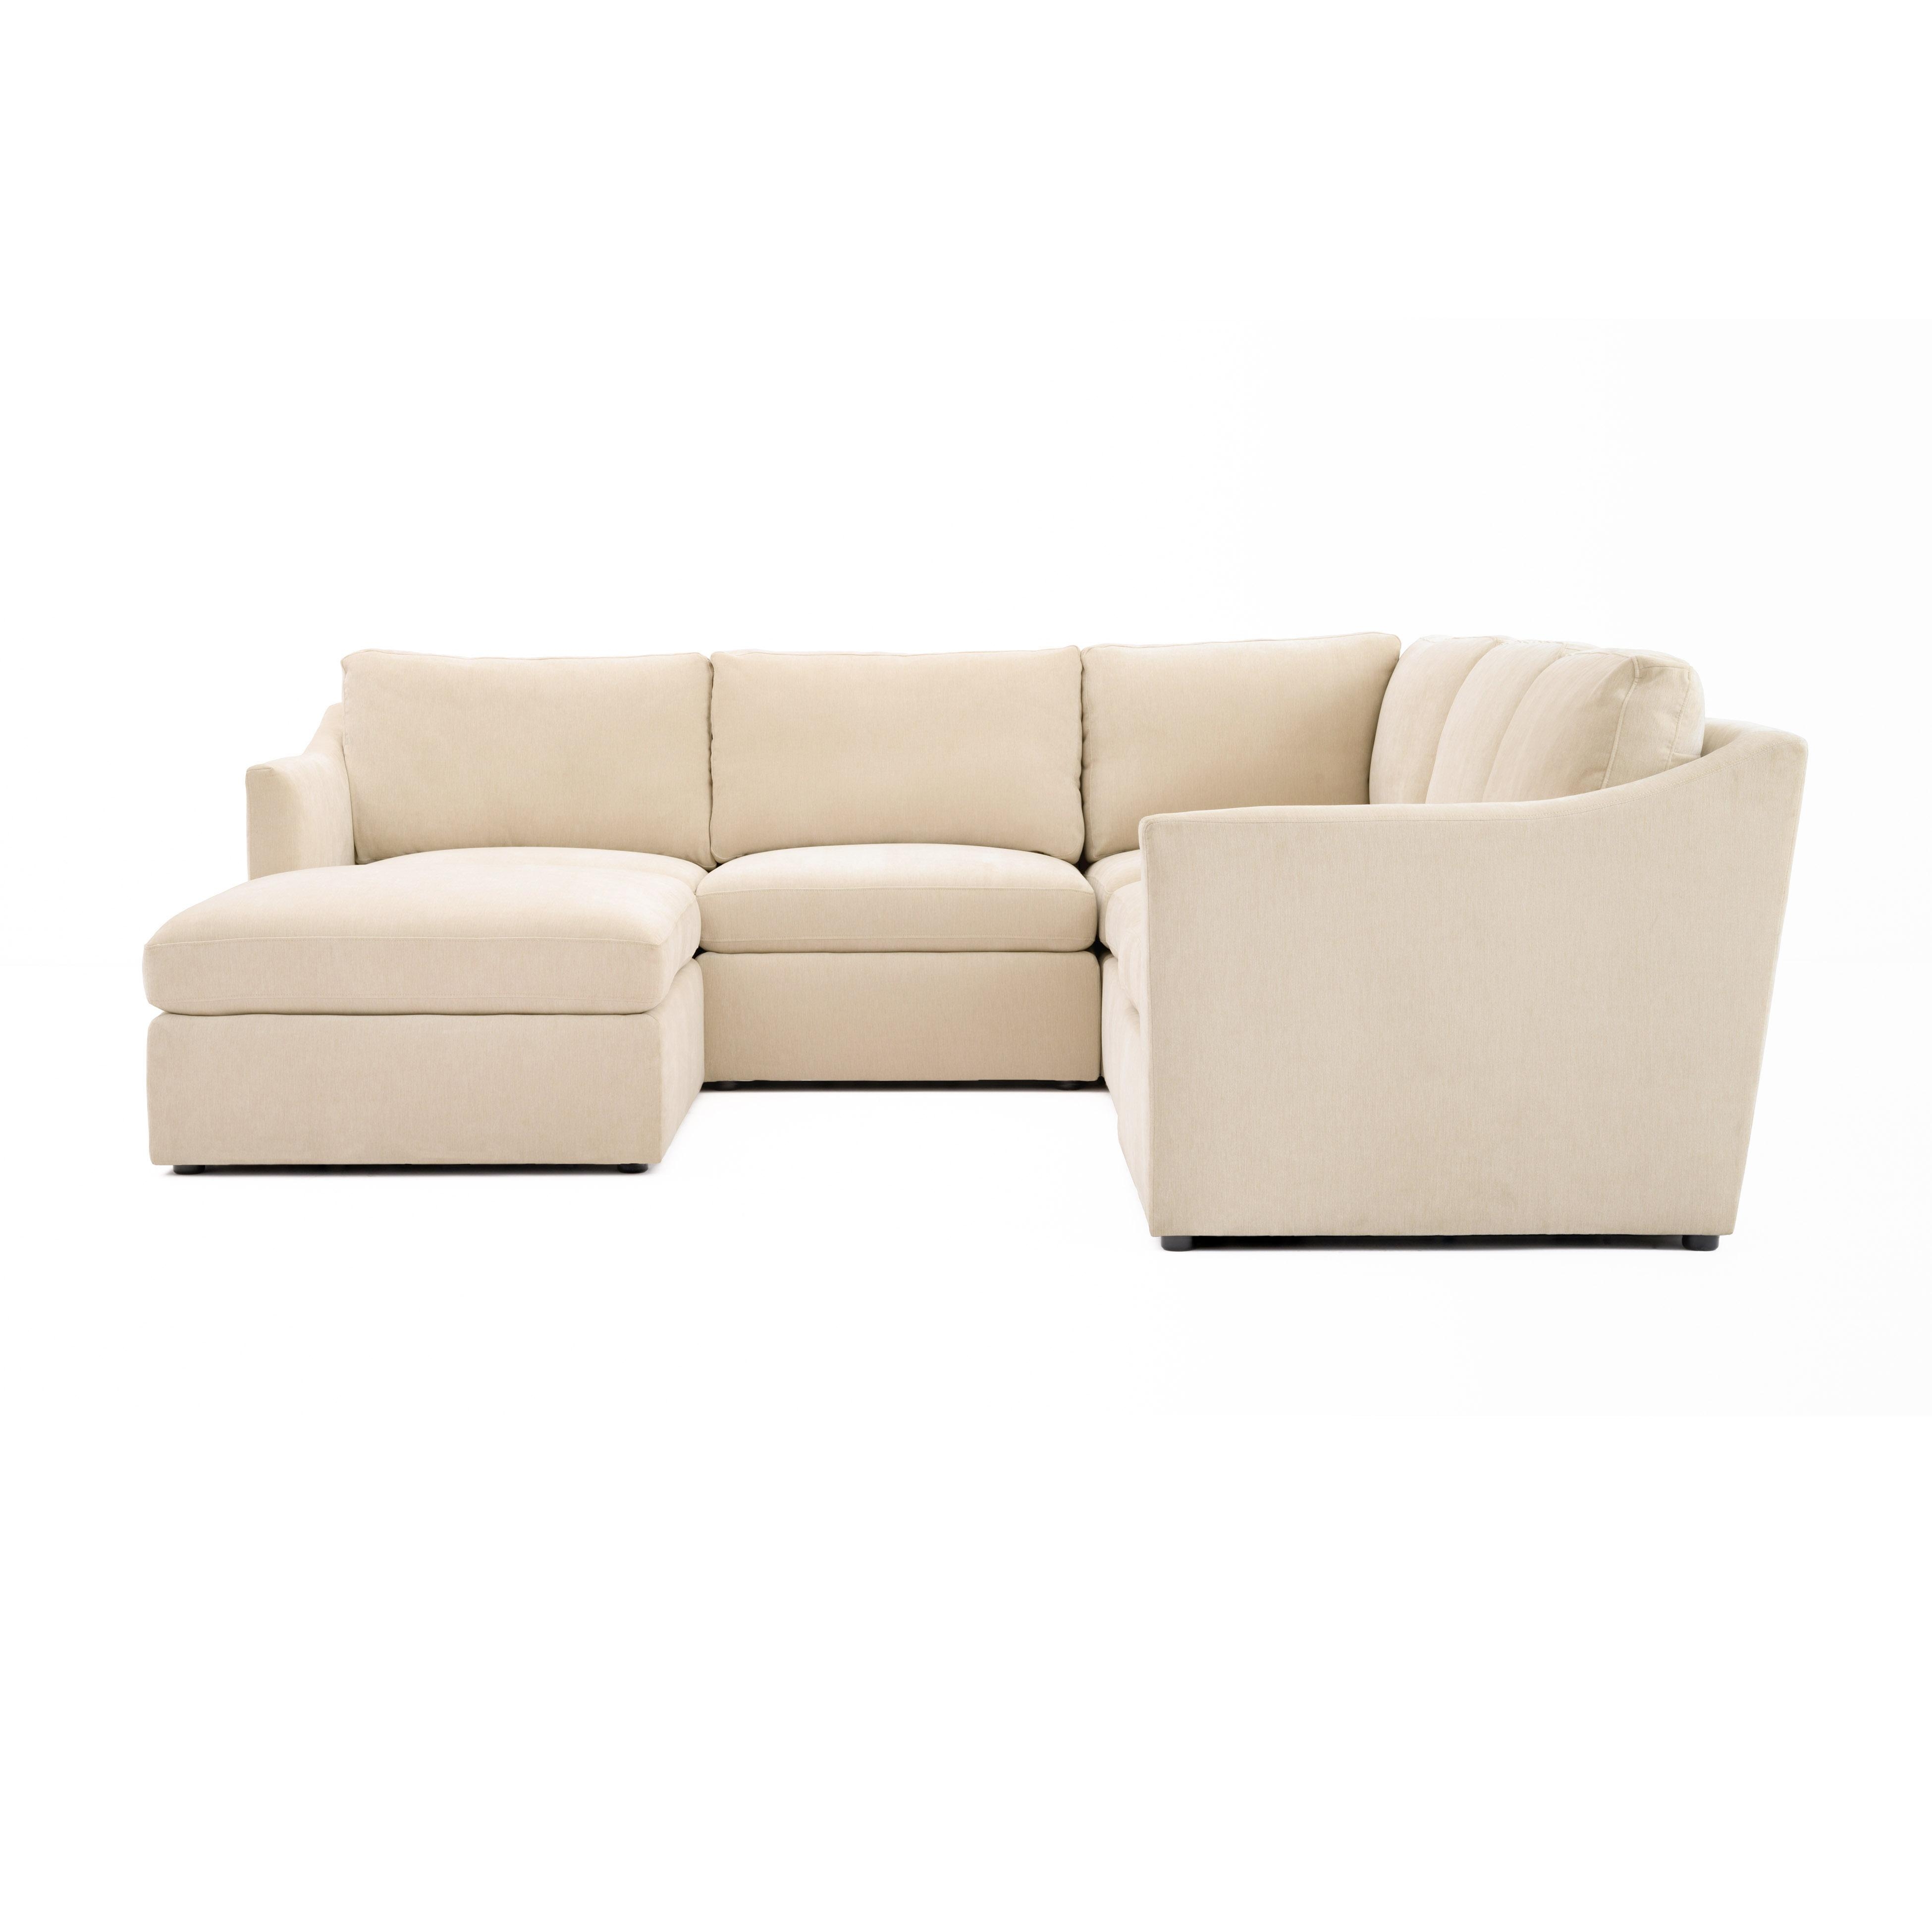 Aiden Beige Modular Chaise Sectional - Image 2